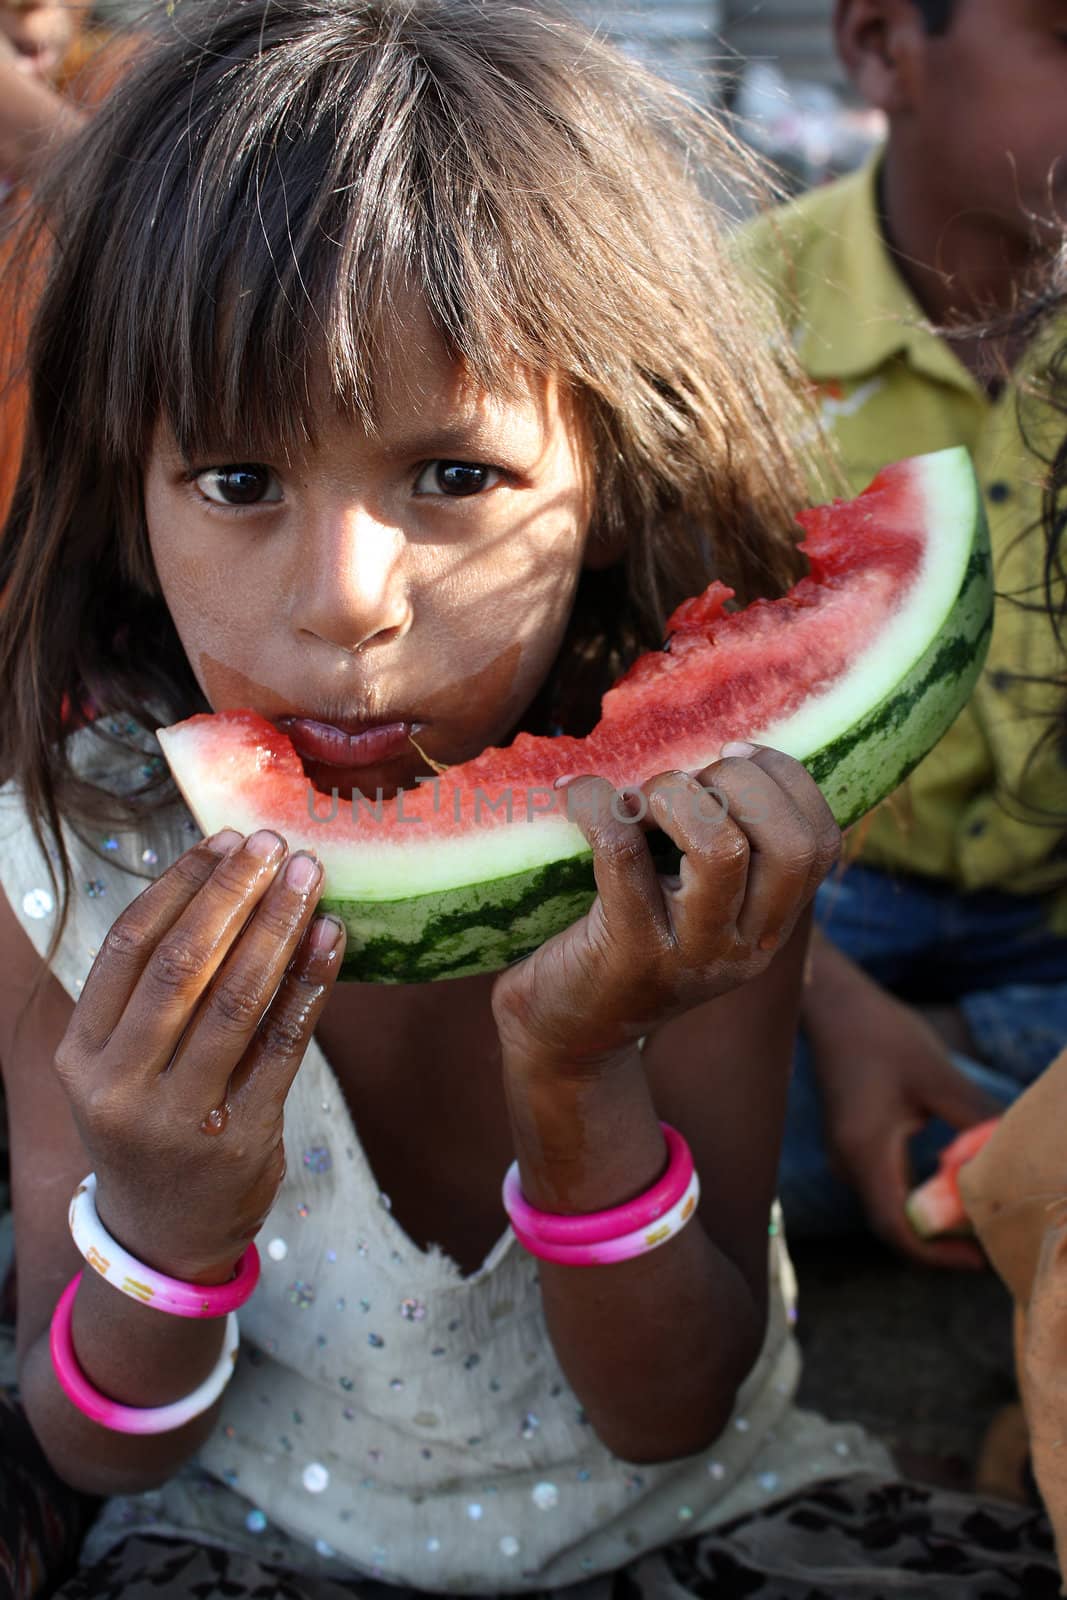 A poor Indian beggar girl hungrily eating a watermelon.